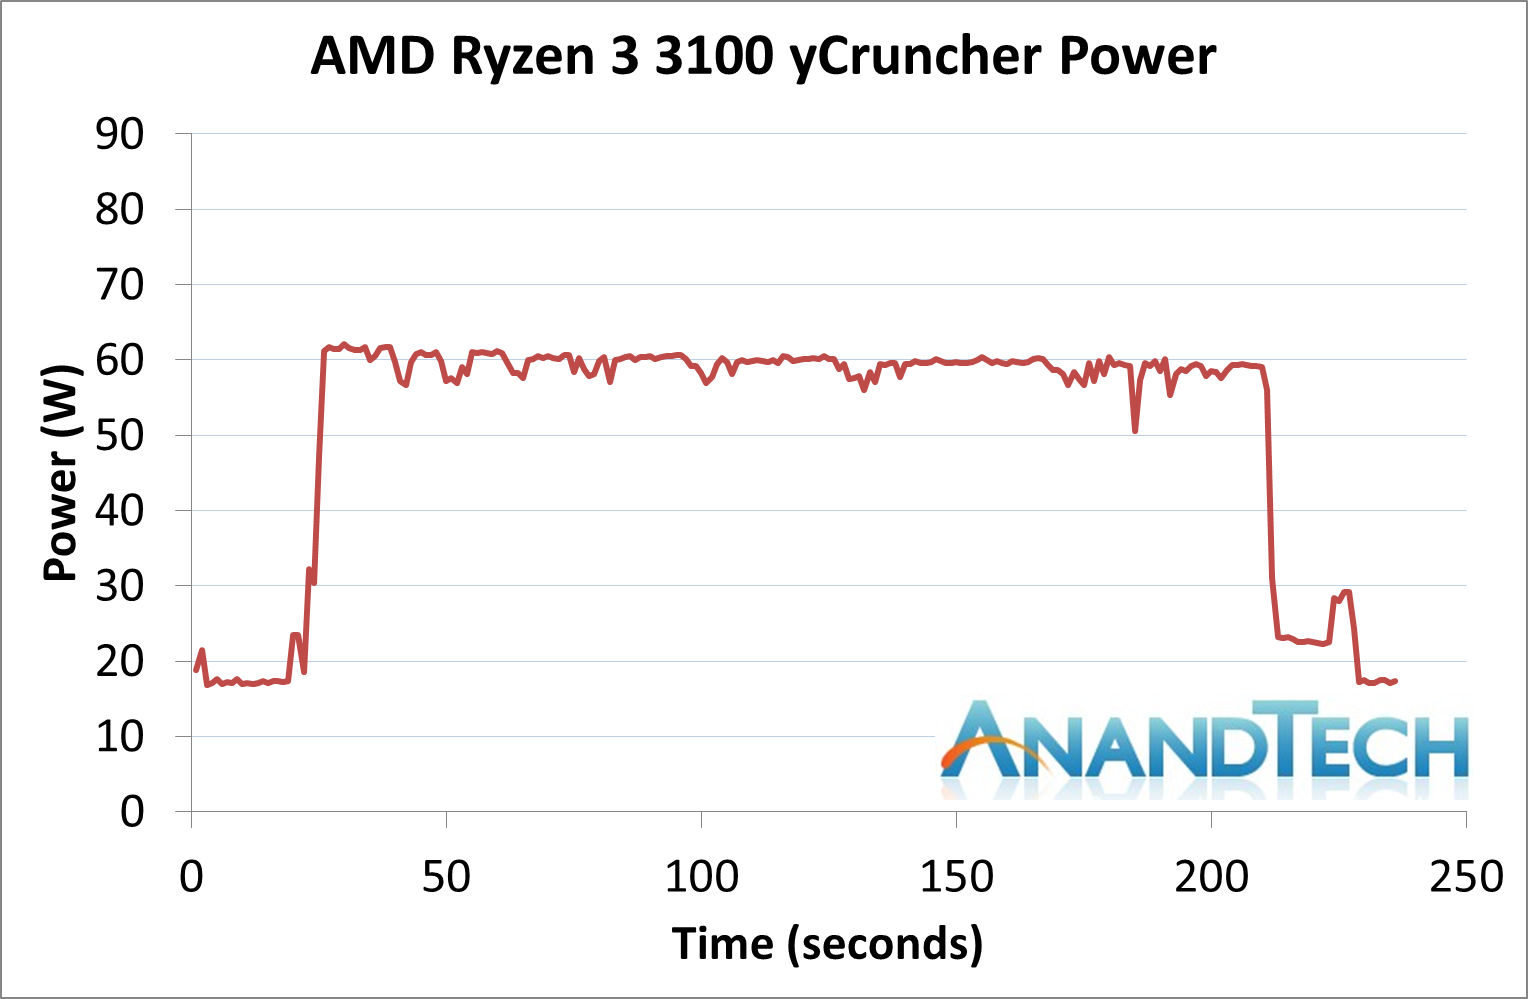 Power Consumption and Frequency Ramps - The AMD Ryzen 3 3300X and